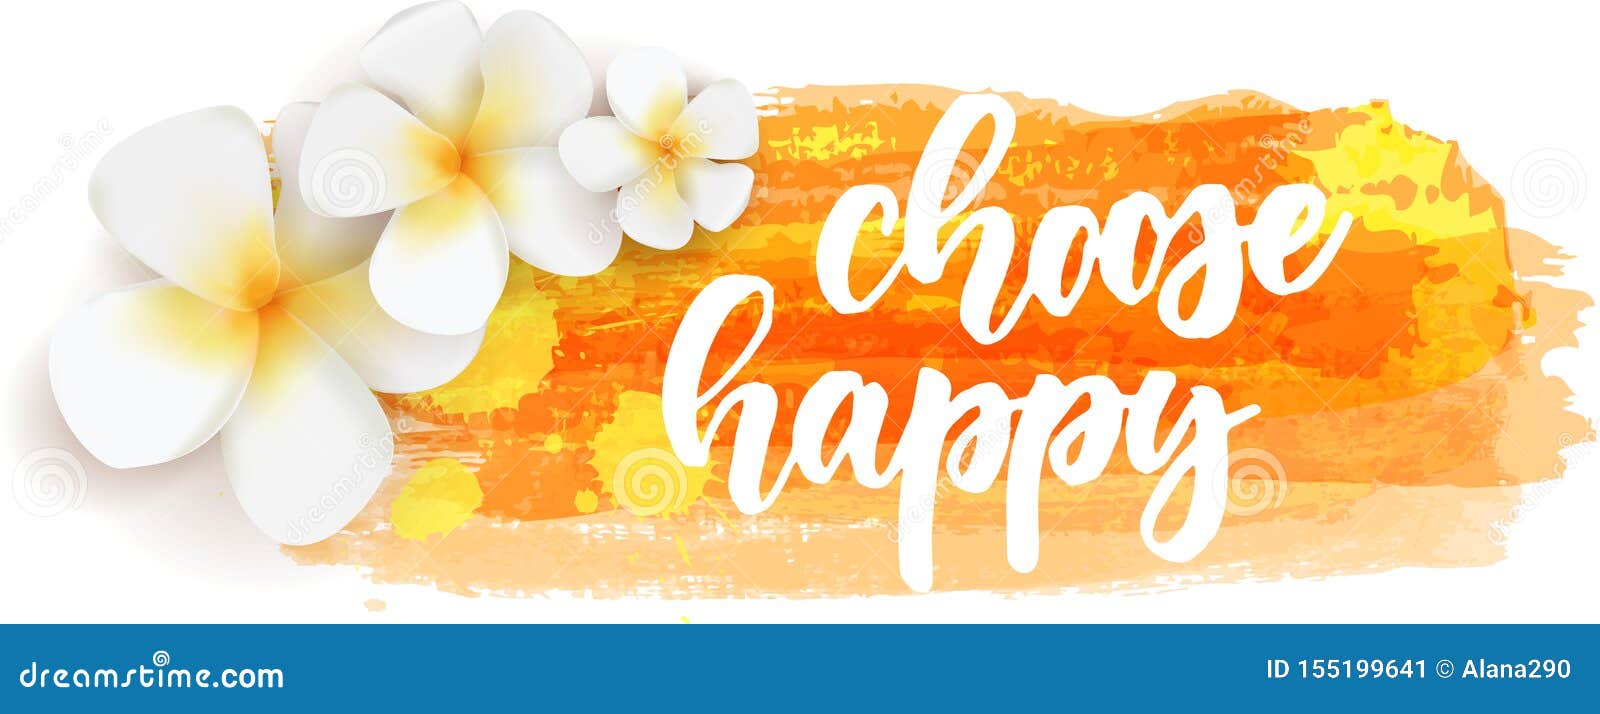 choose happy - calligraphy on background with flowers